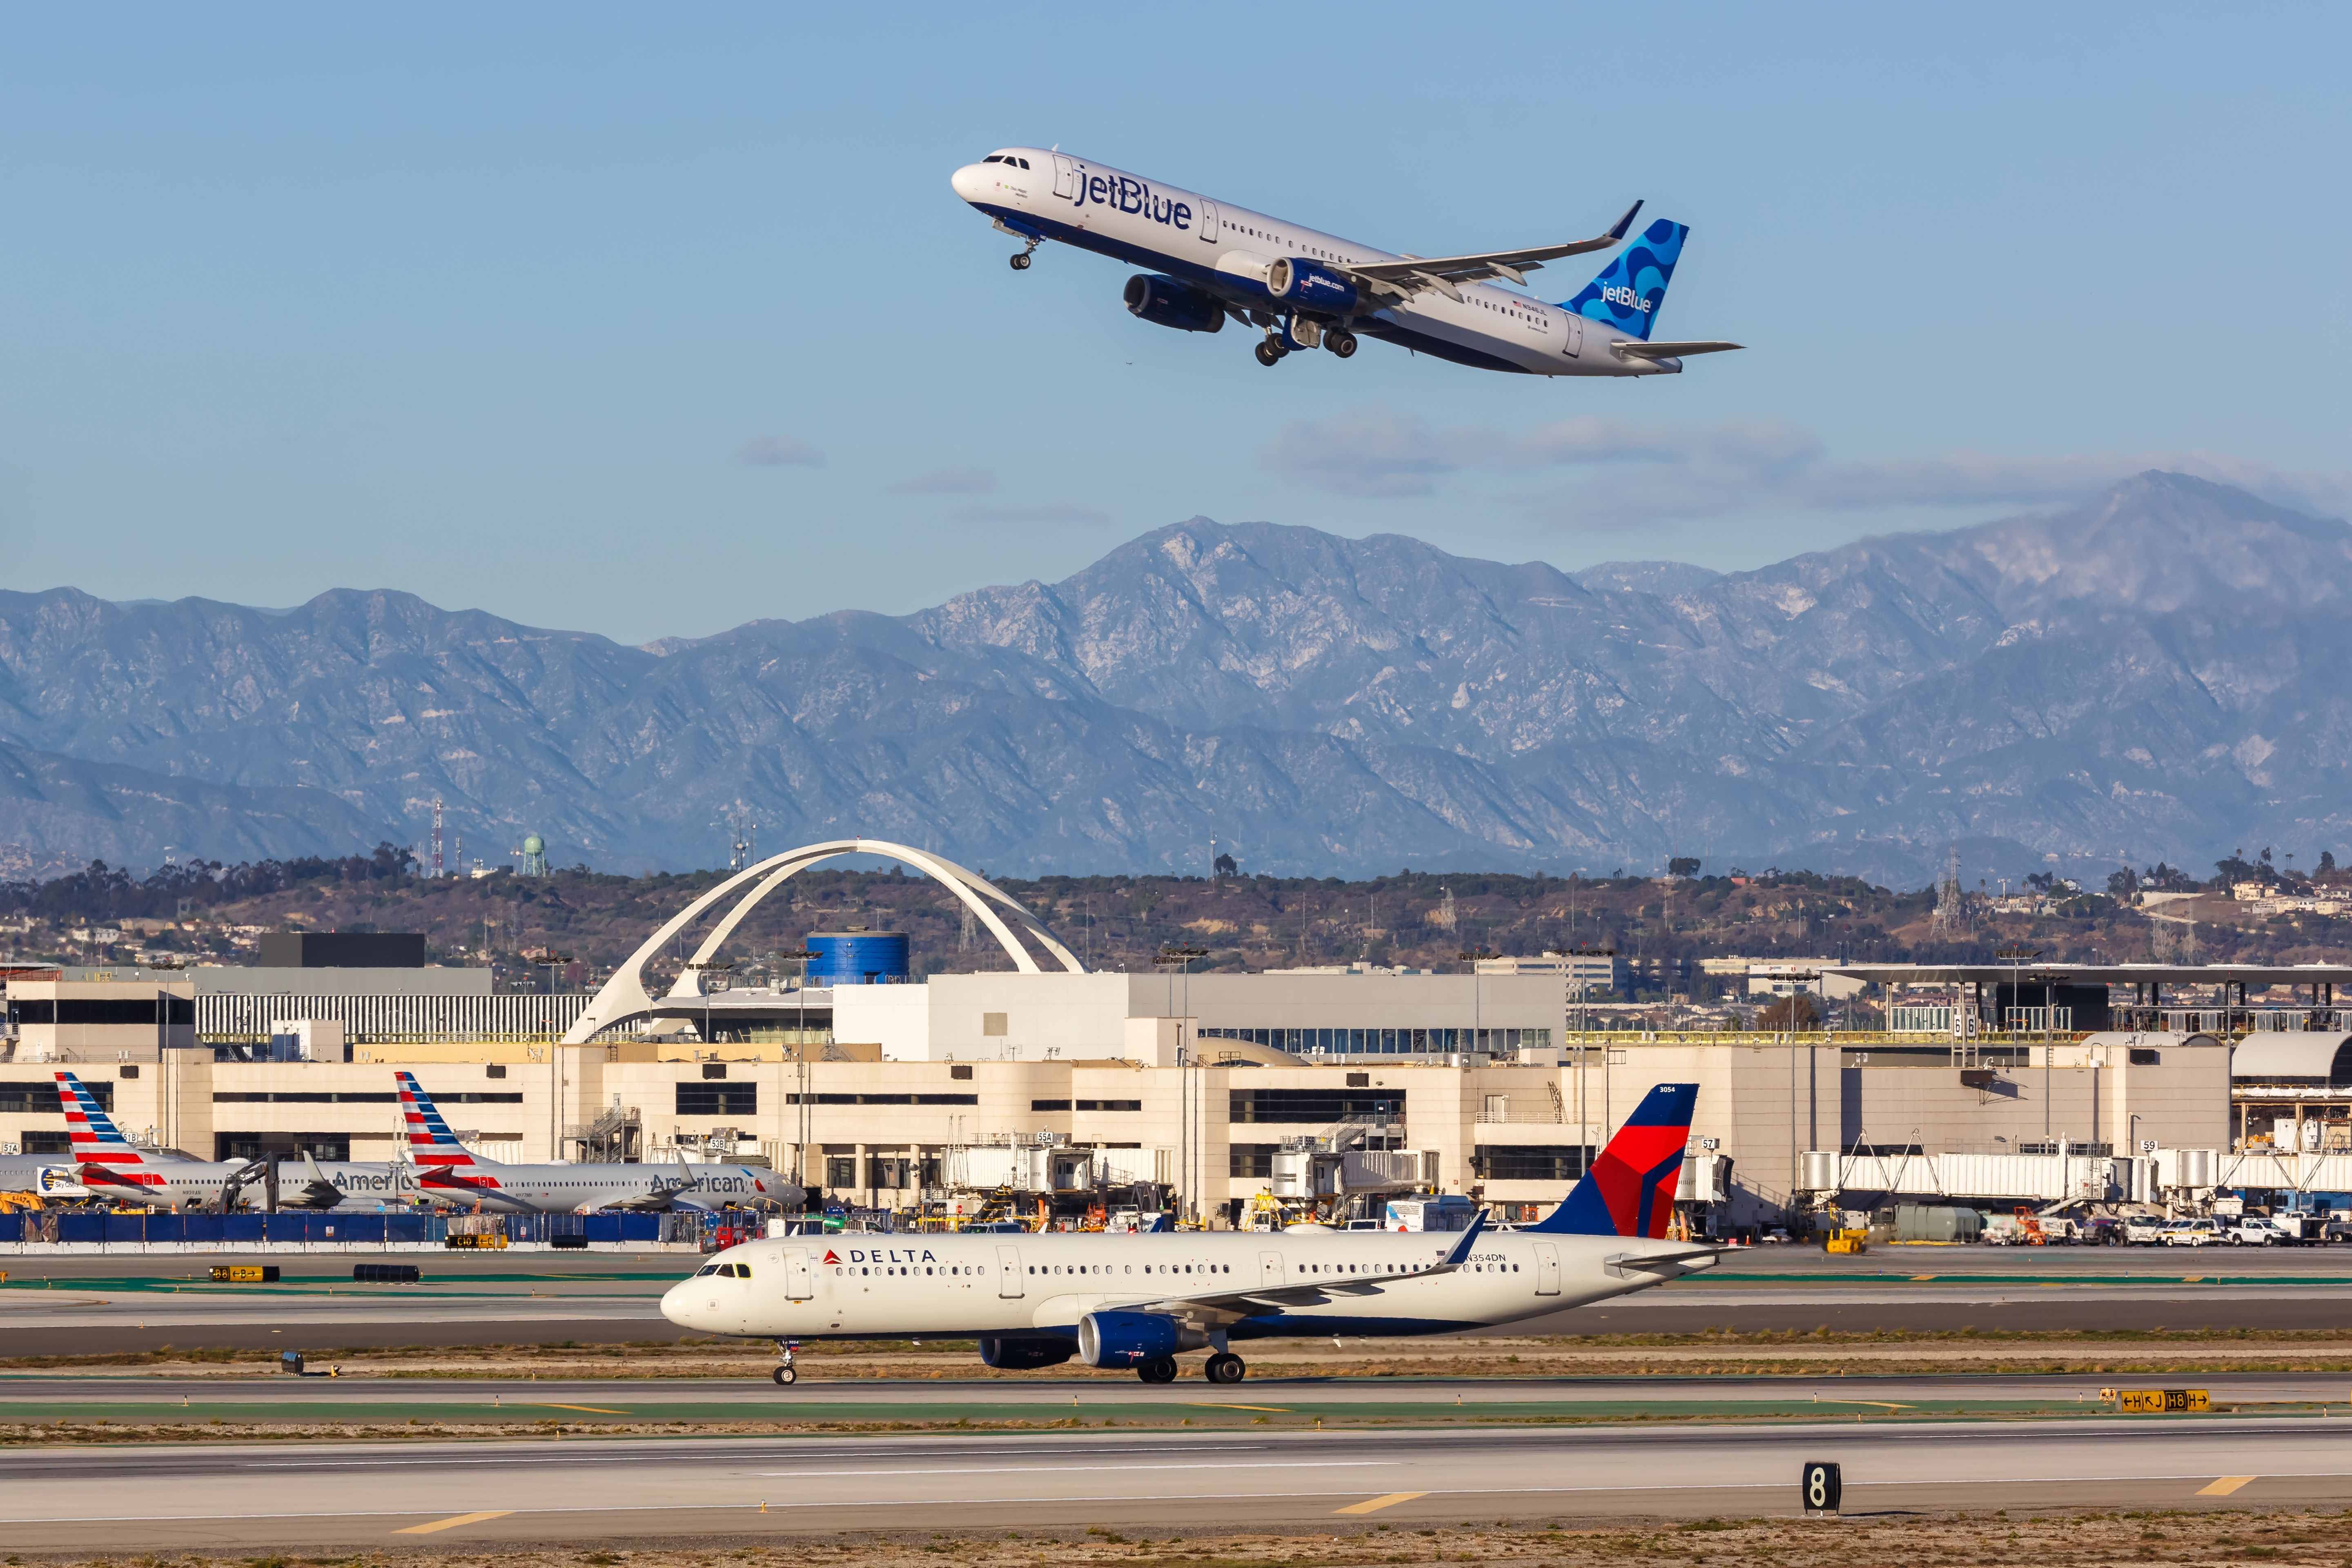 American Airlines, Delta Air Lines, and jetBlue aircraft at Los Angeles International Airport.